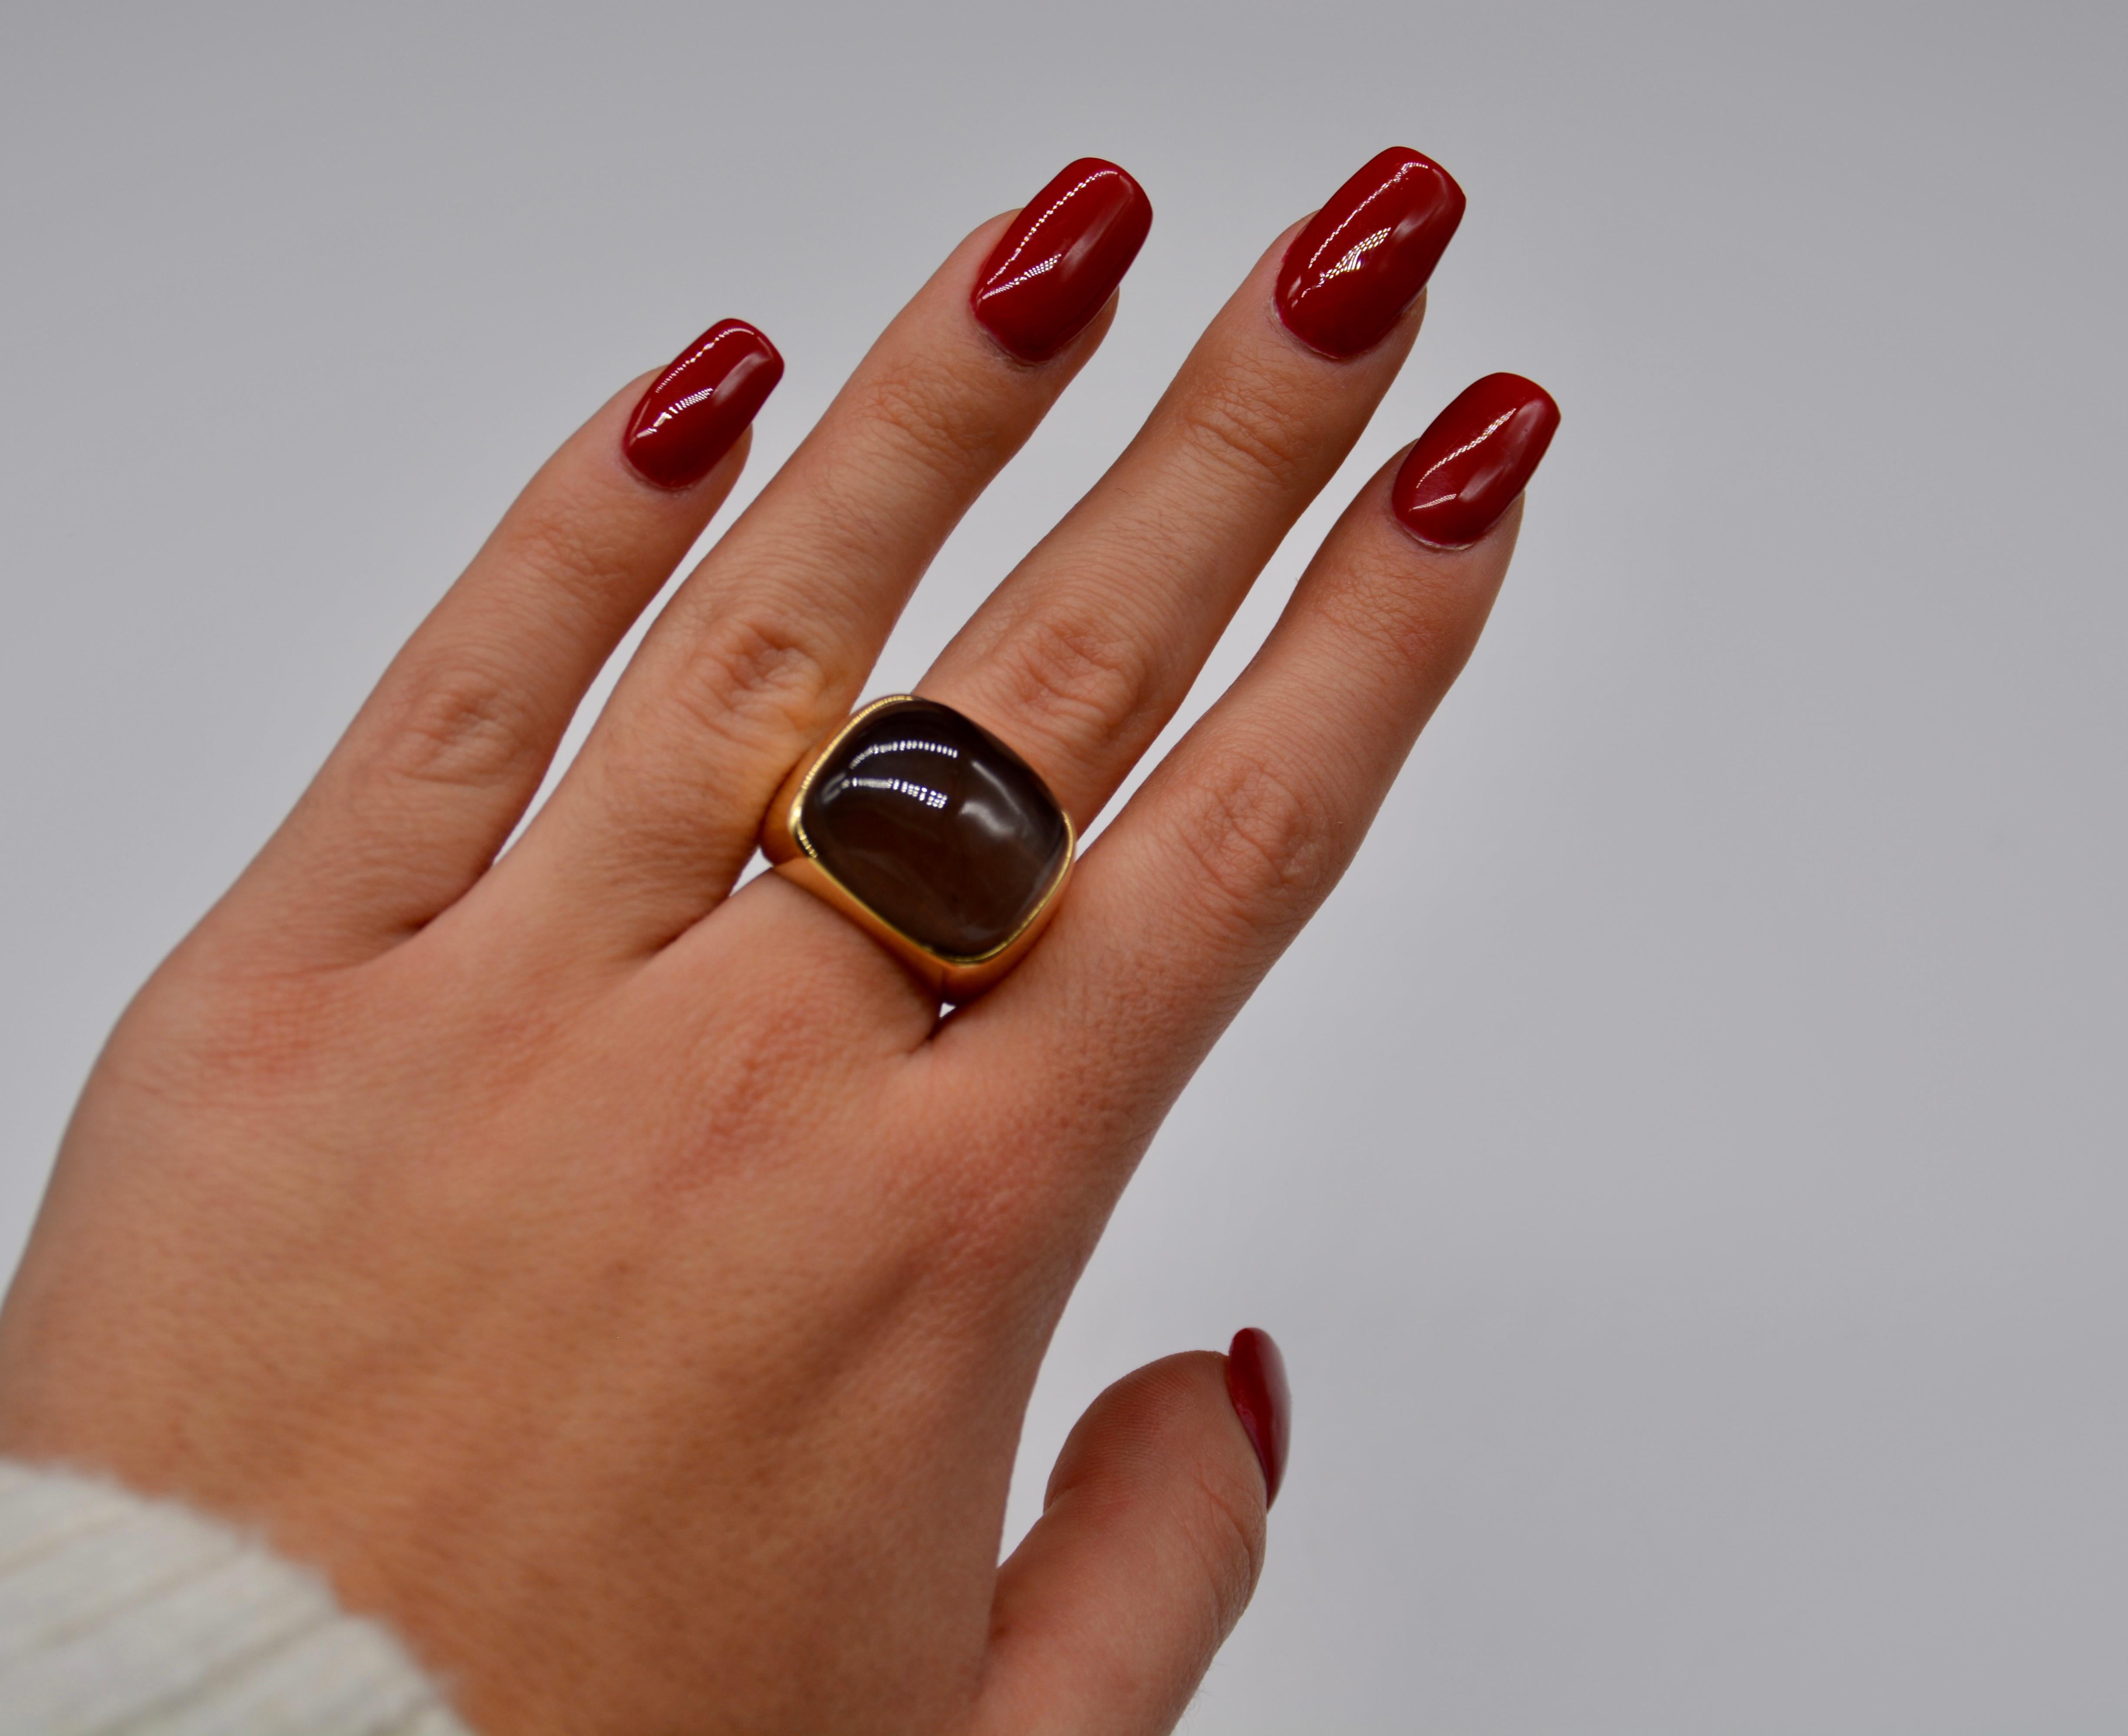 Splendid French ring in smoky quartz cabochon and 18-carat yellow gold, which meets 1st Dibs listing criteria. This exceptional piece is a real gem that will seduce you with its timeless elegance and surprising benefits.

This remarkable ring is